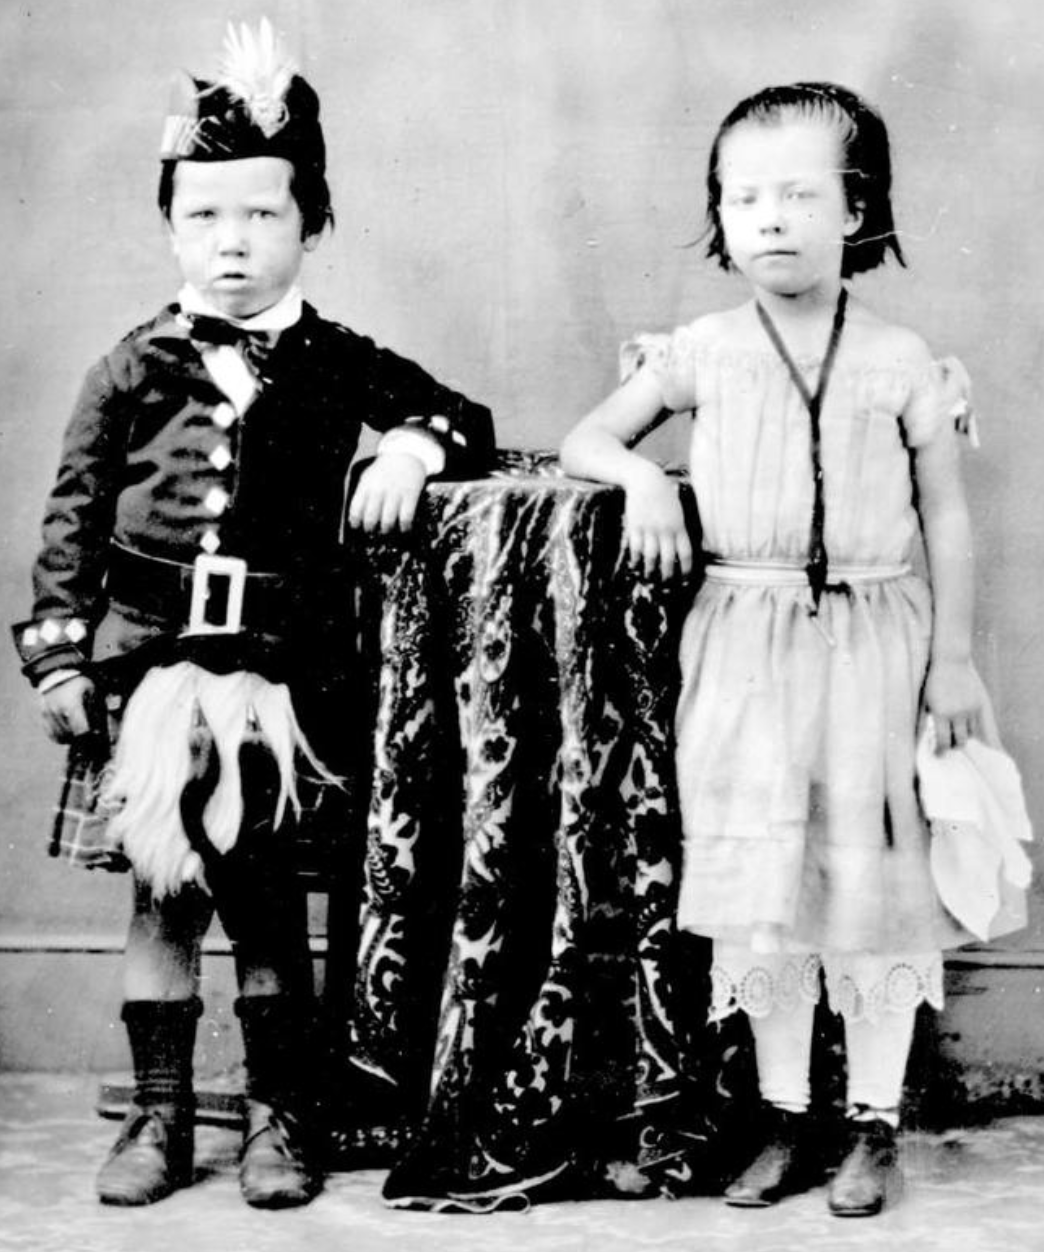 black and white photo of two children in Scottish clothing